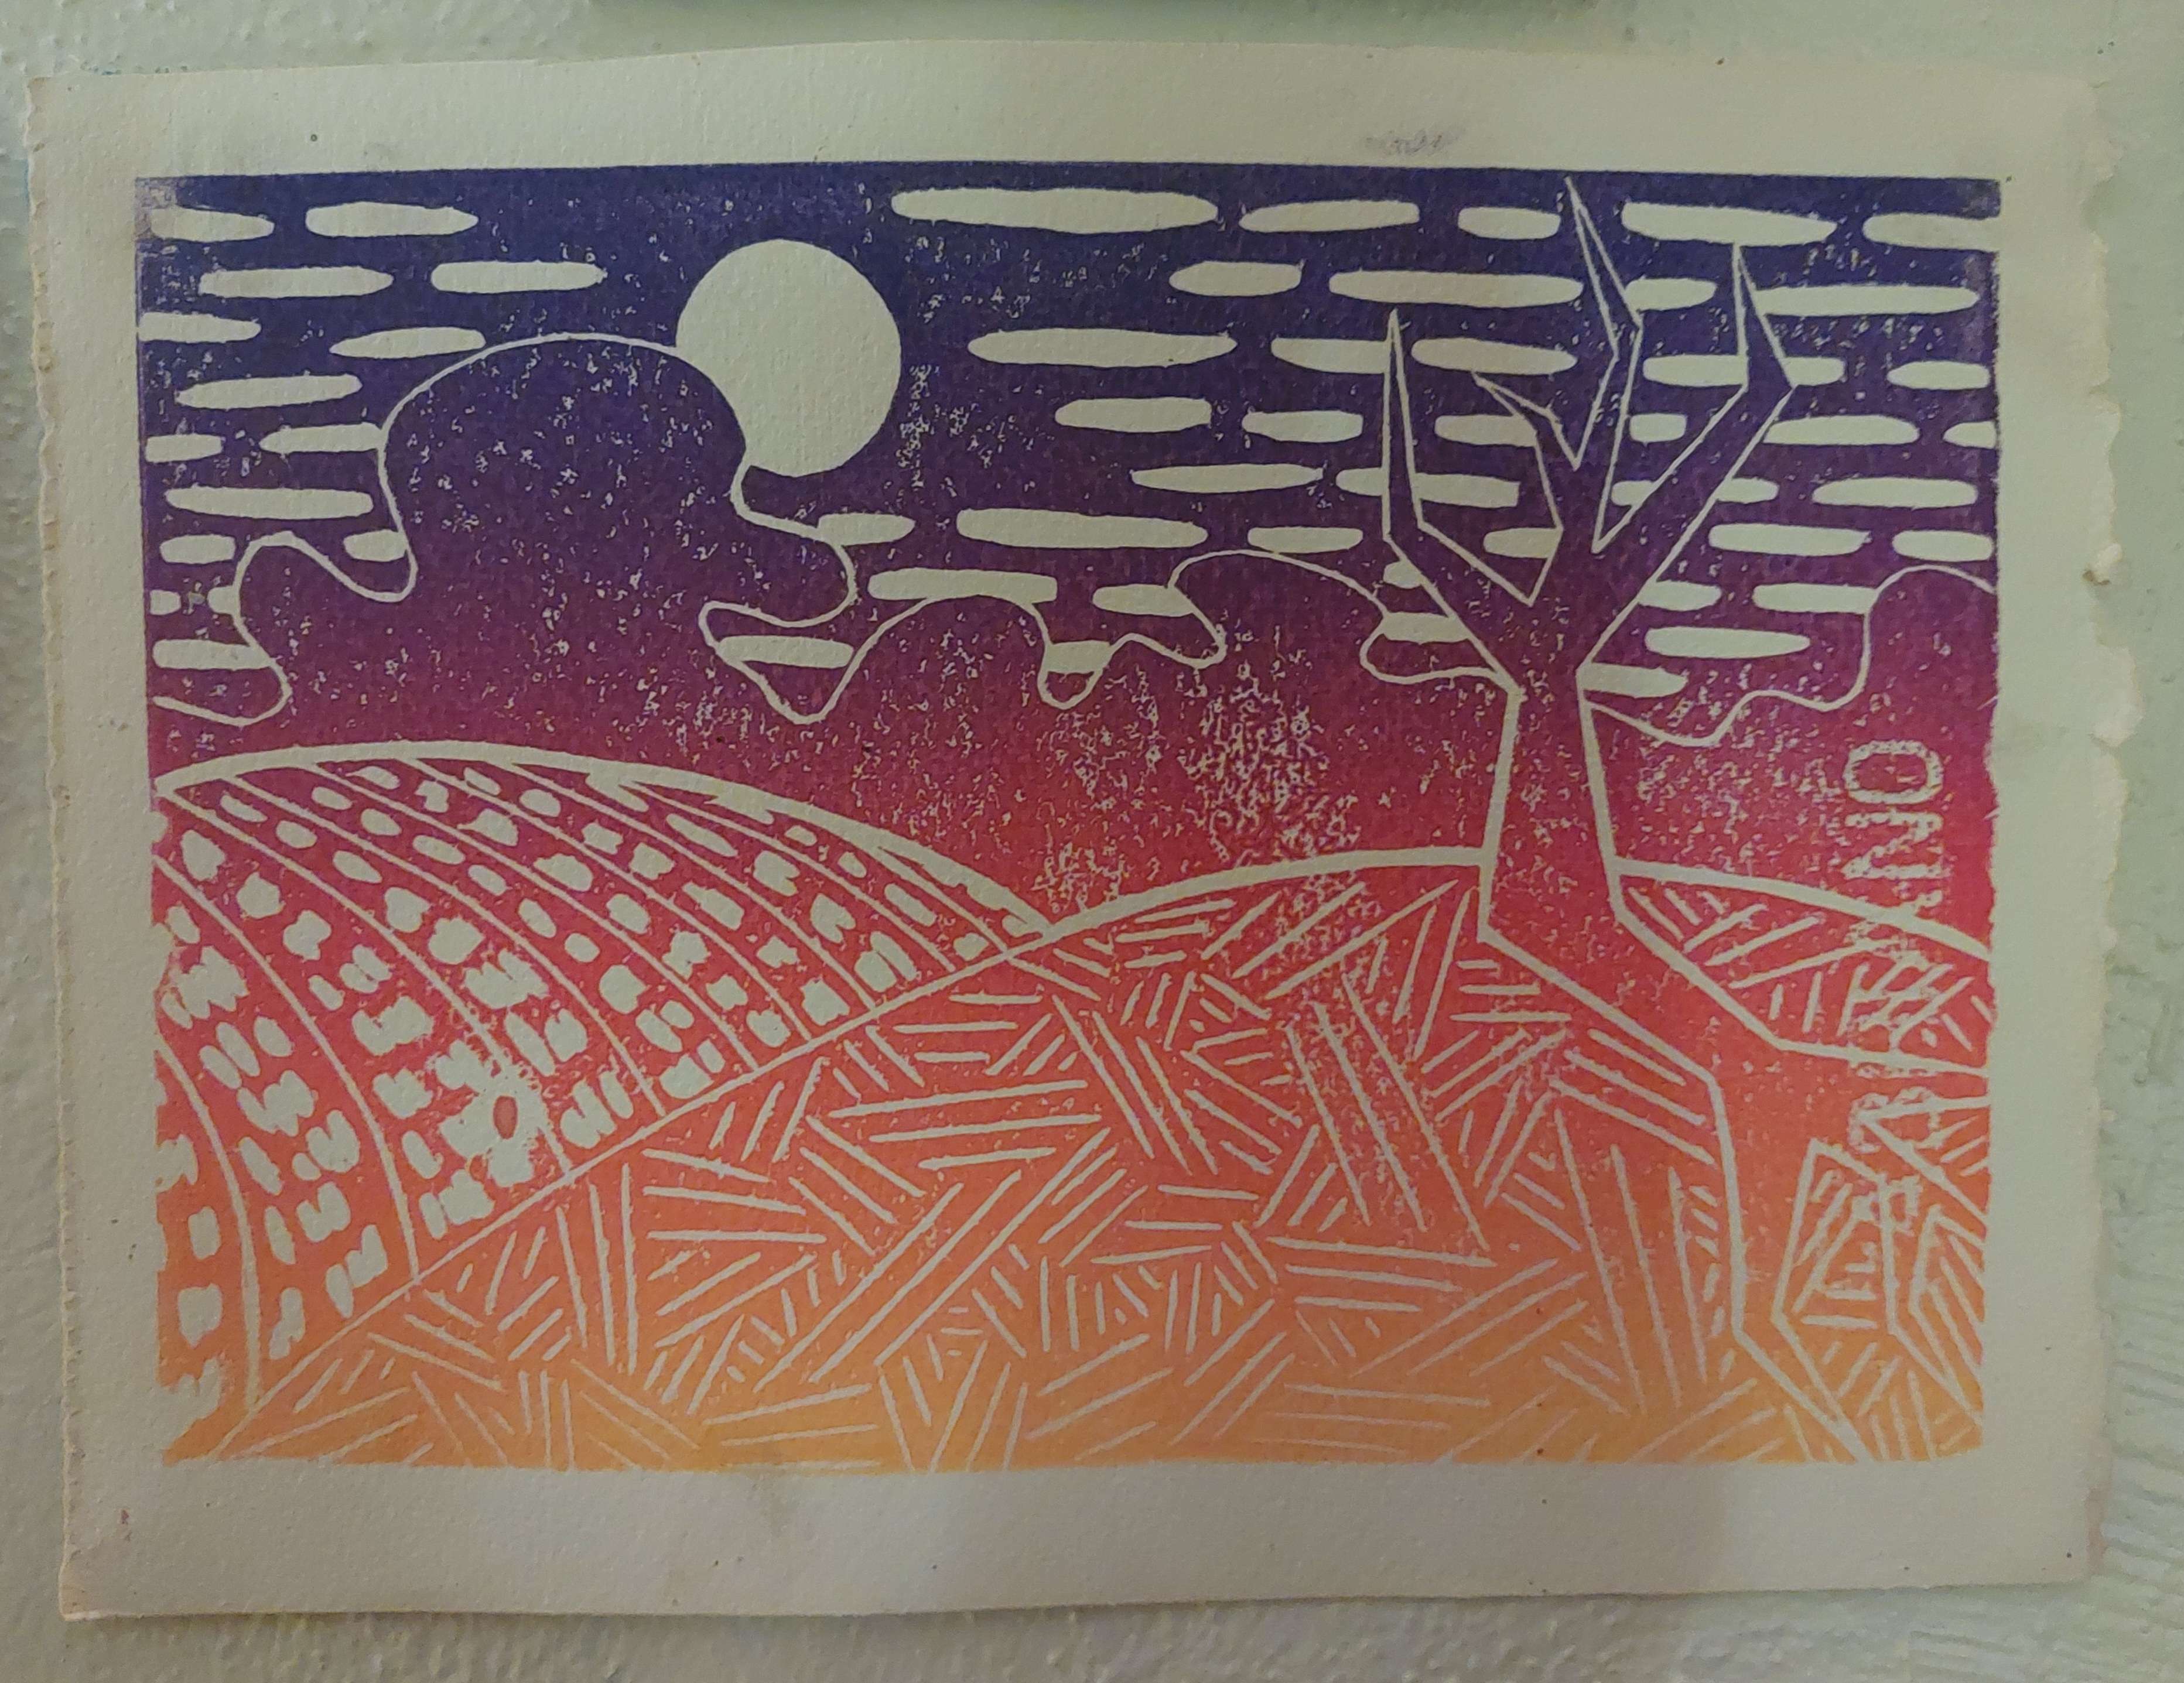 a linoblock print of a sun in the sky over two rolling hills, casting shadows of a barren tree. printed in a purple-orange gradient, it gives the impression of a sun setting into dark night.